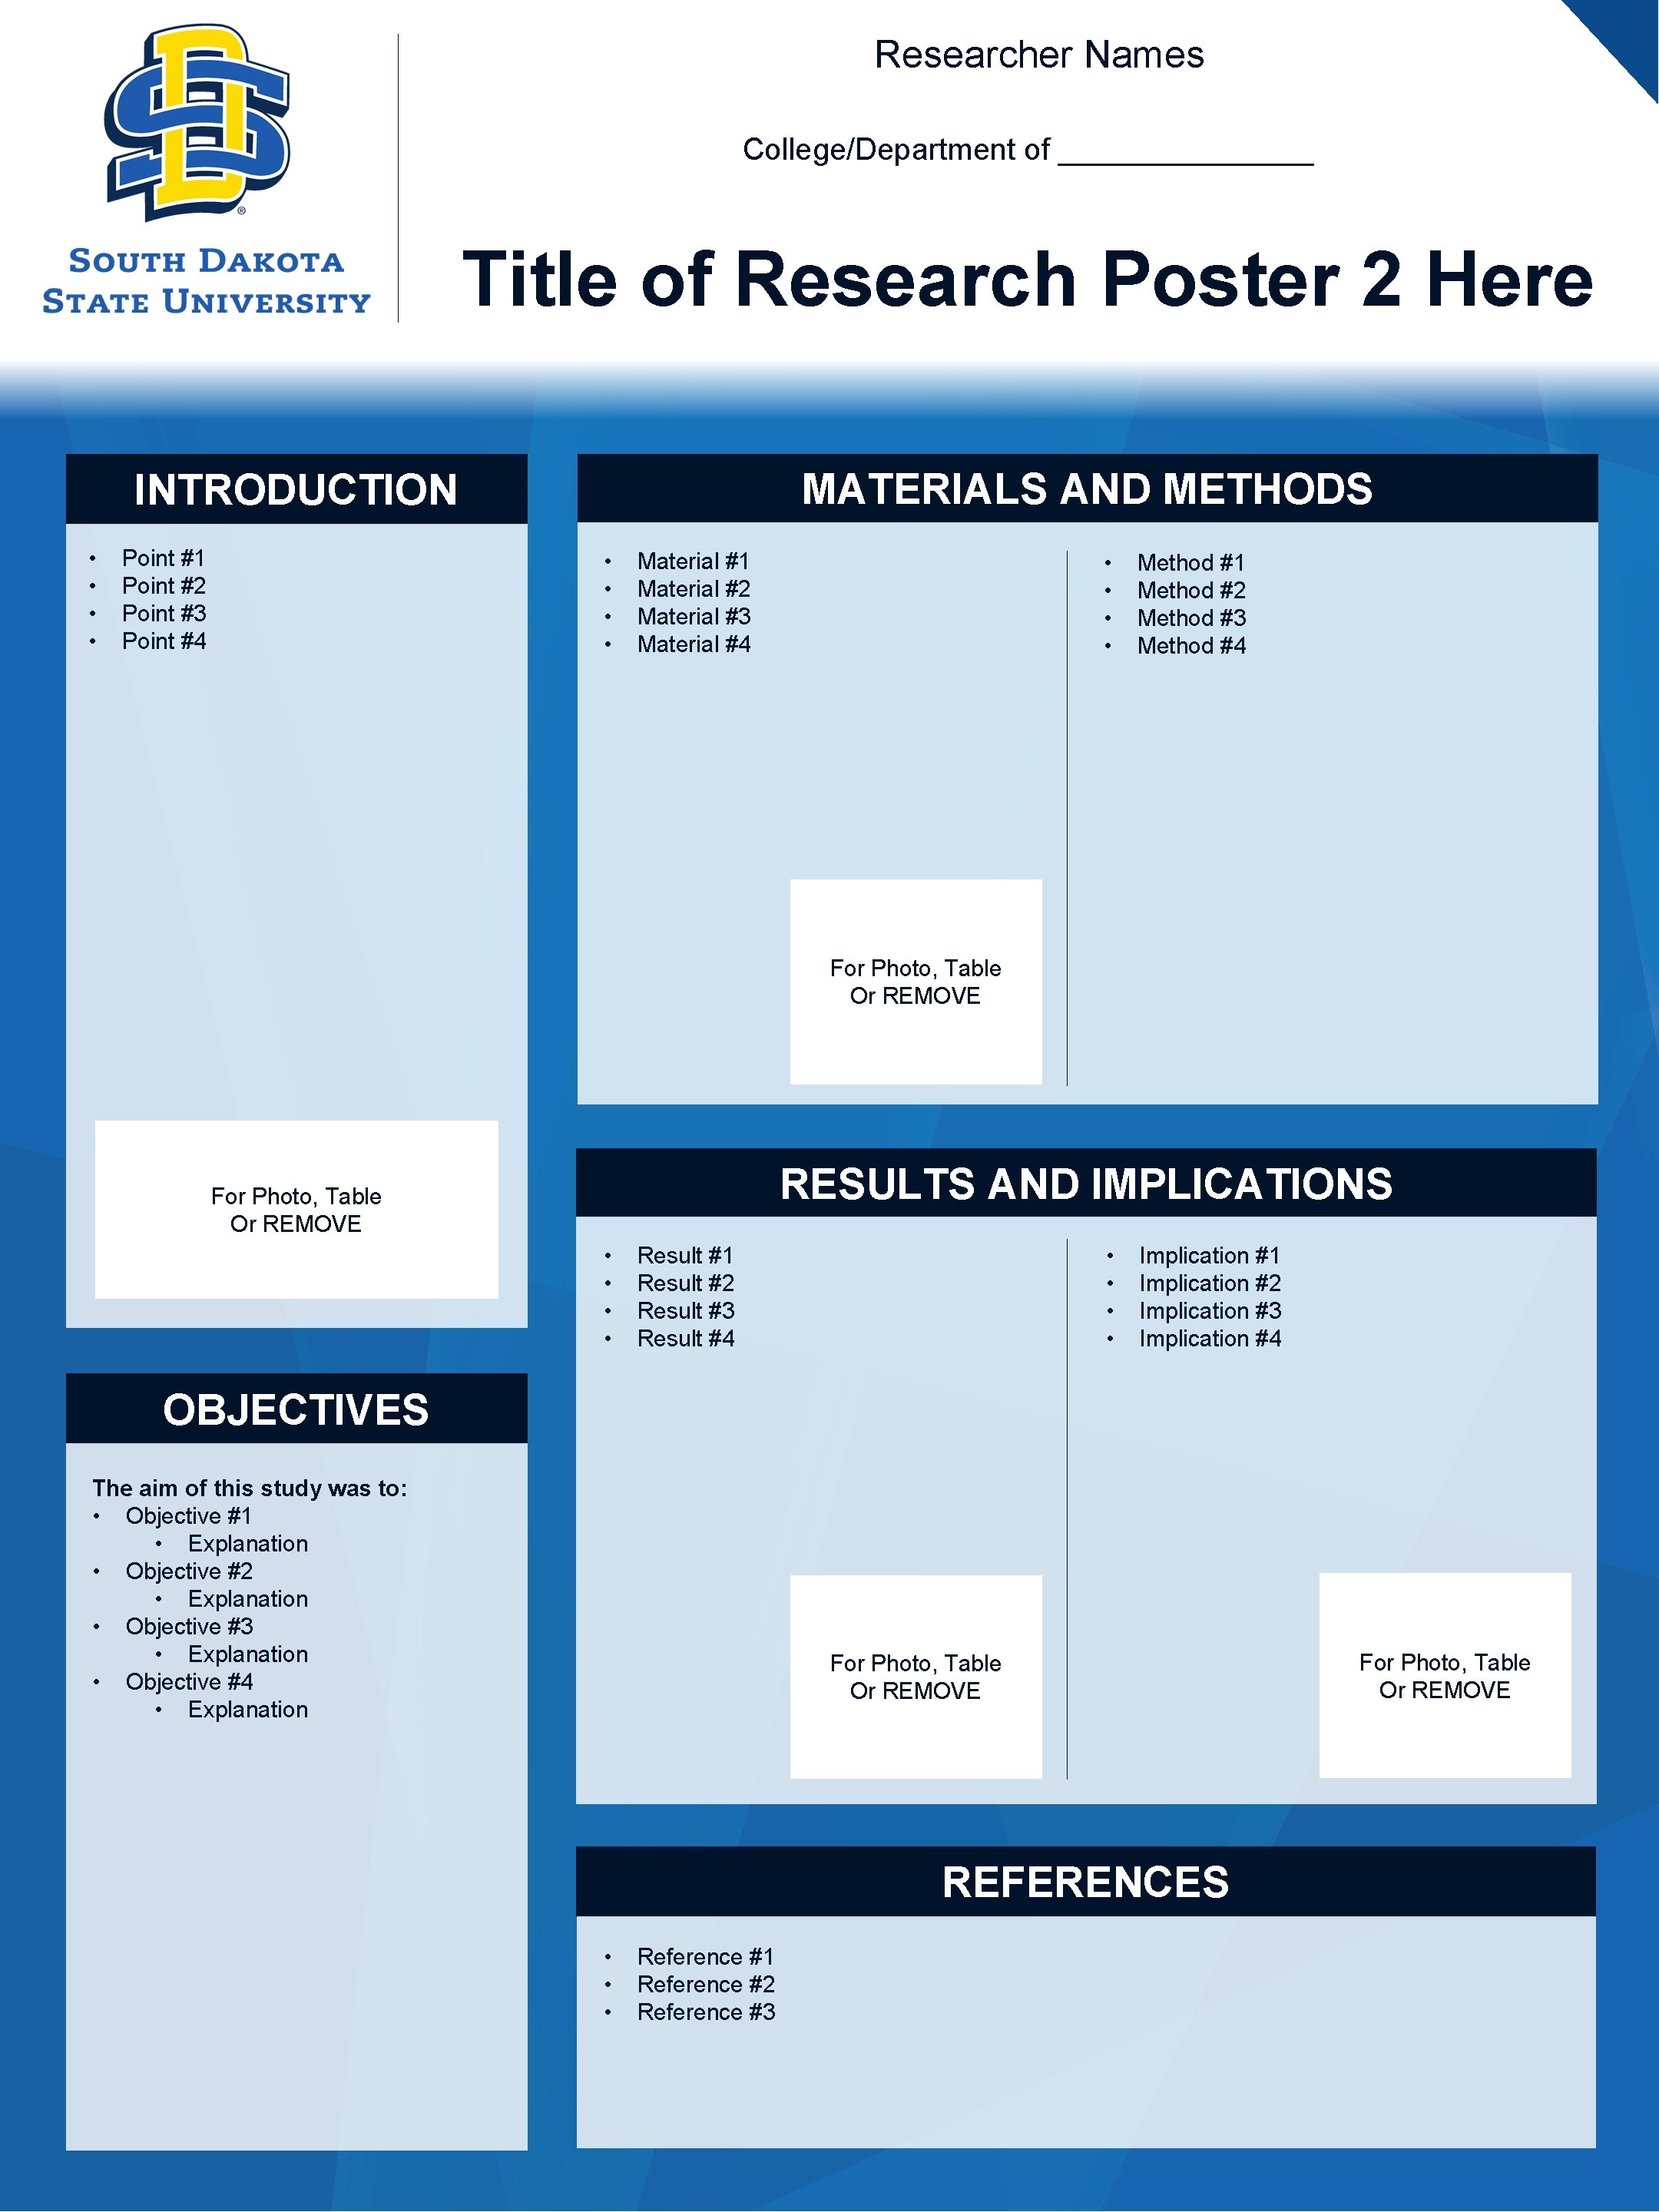 Researcher Names College/Department of ________ Title of Research Poster 2 Here MATERIALS AND METHODS